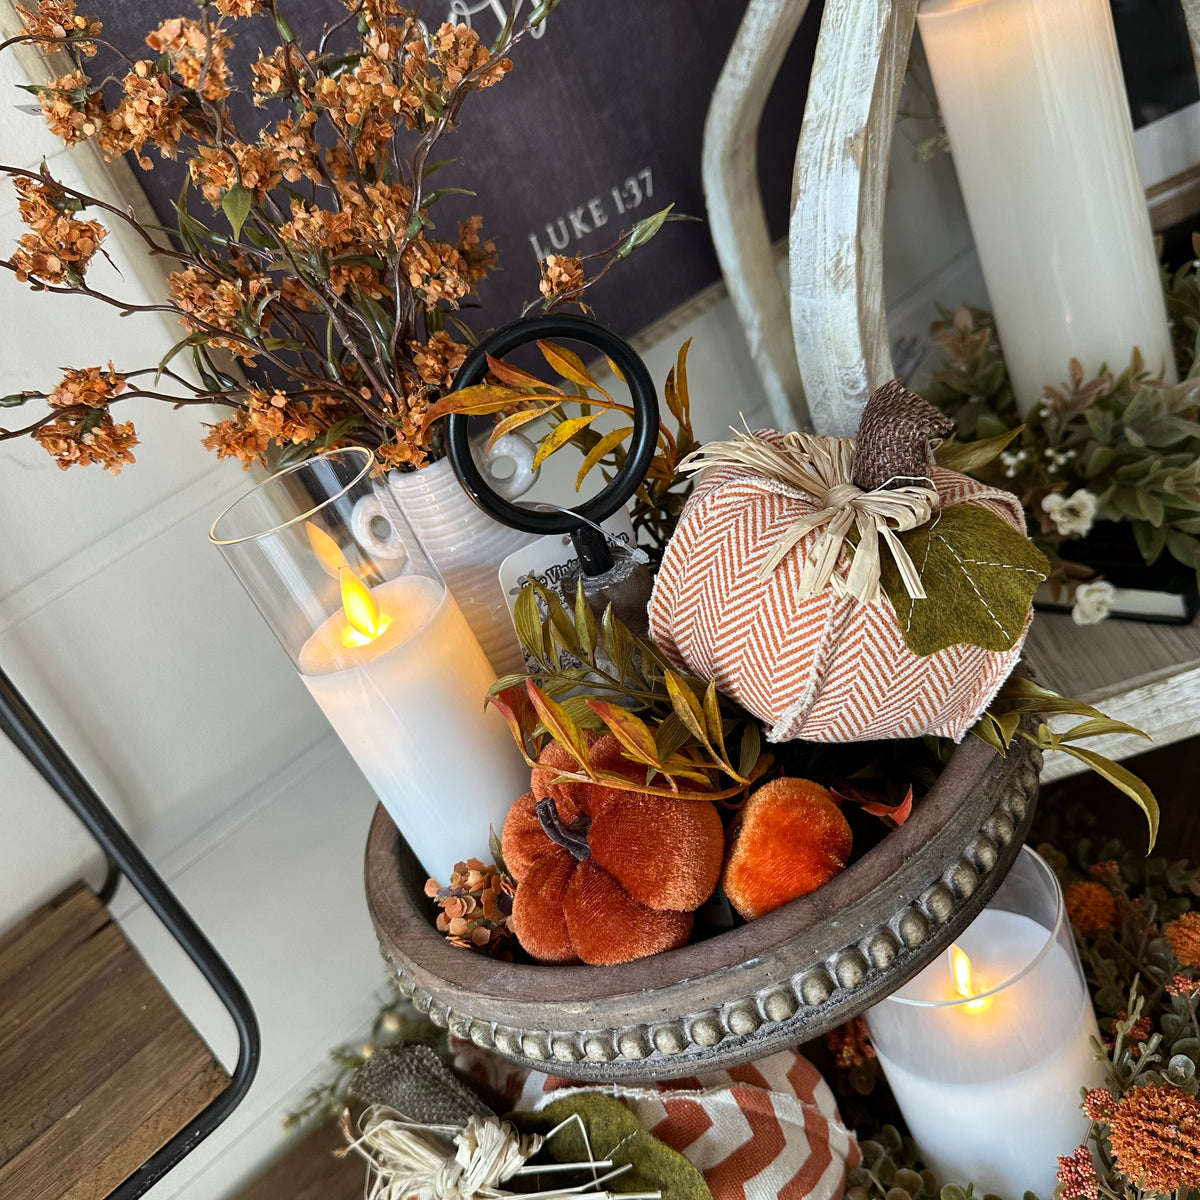 Tiered Pumpkin &amp; Candle Setting | Autumn Tabletop Display